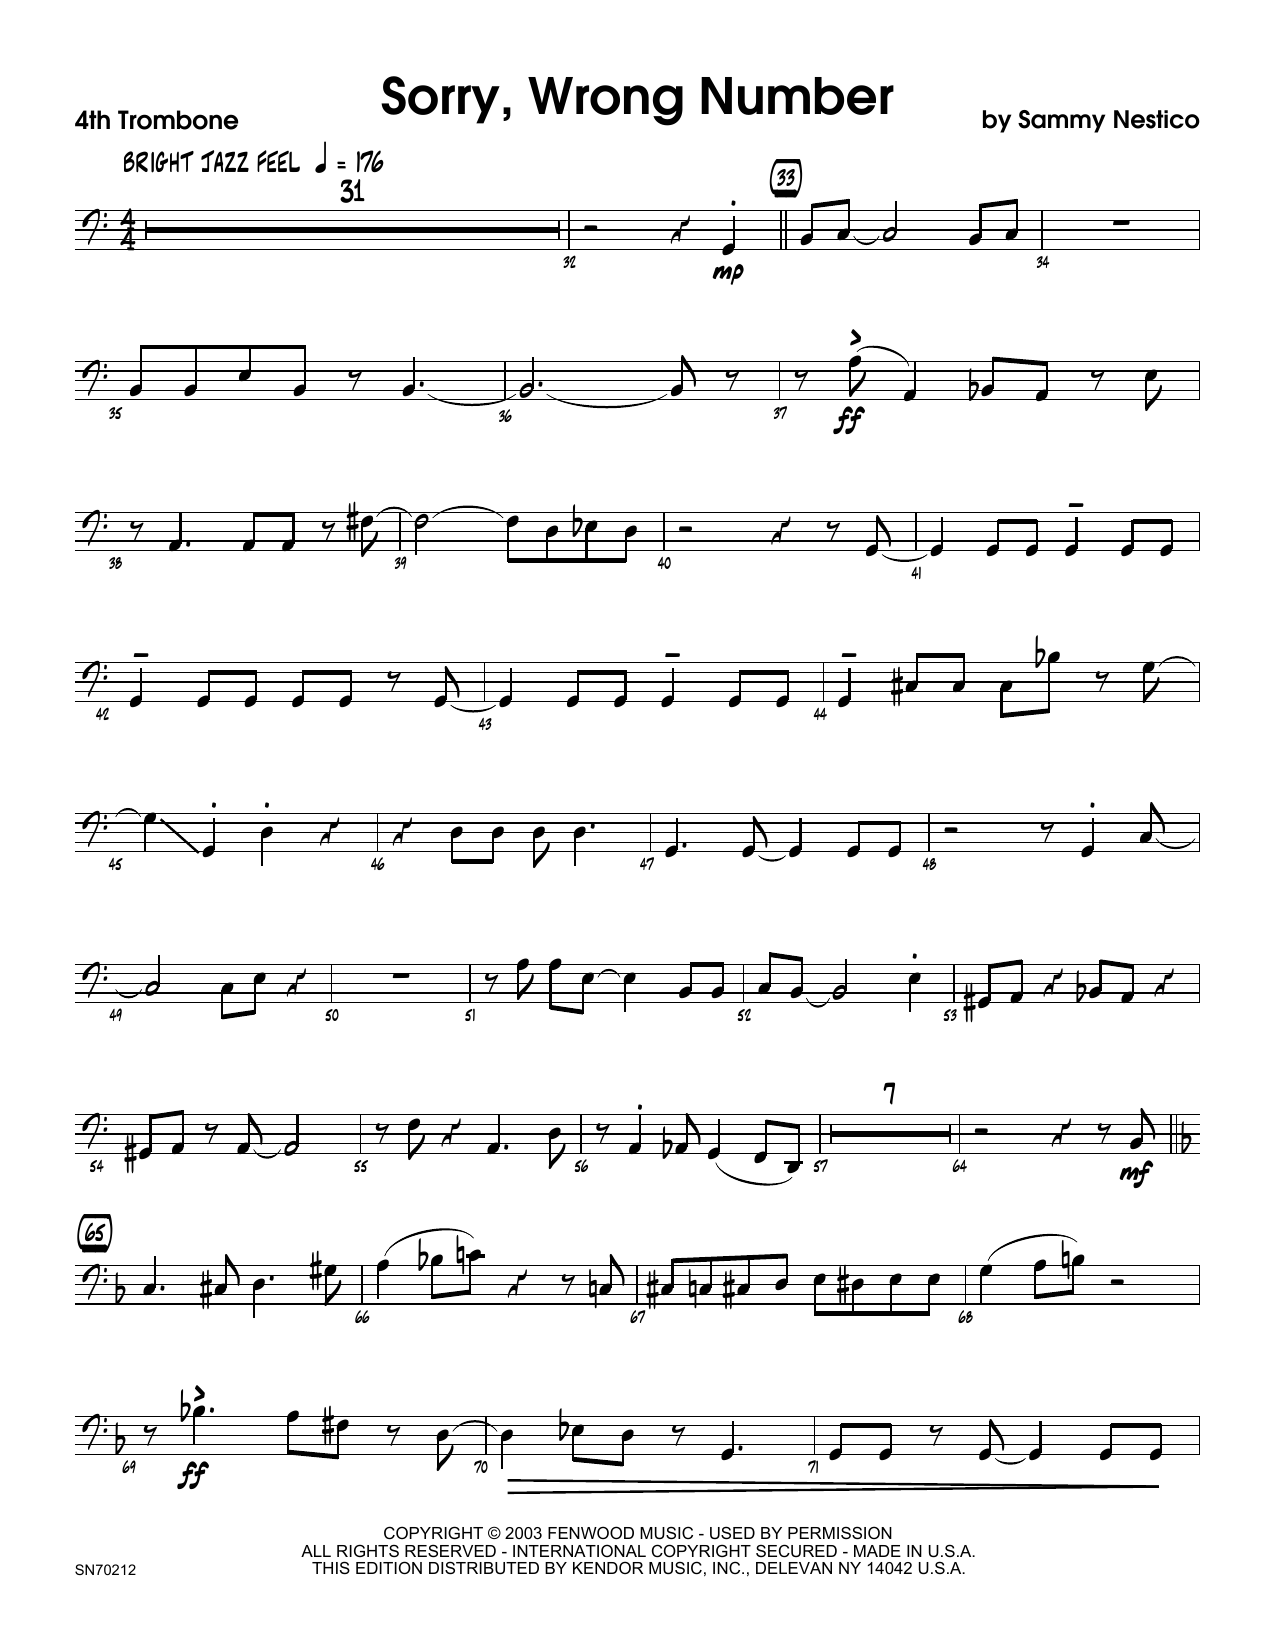 Download Sammy Nestico Sorry, Wrong Number - 4th Trombone Sheet Music